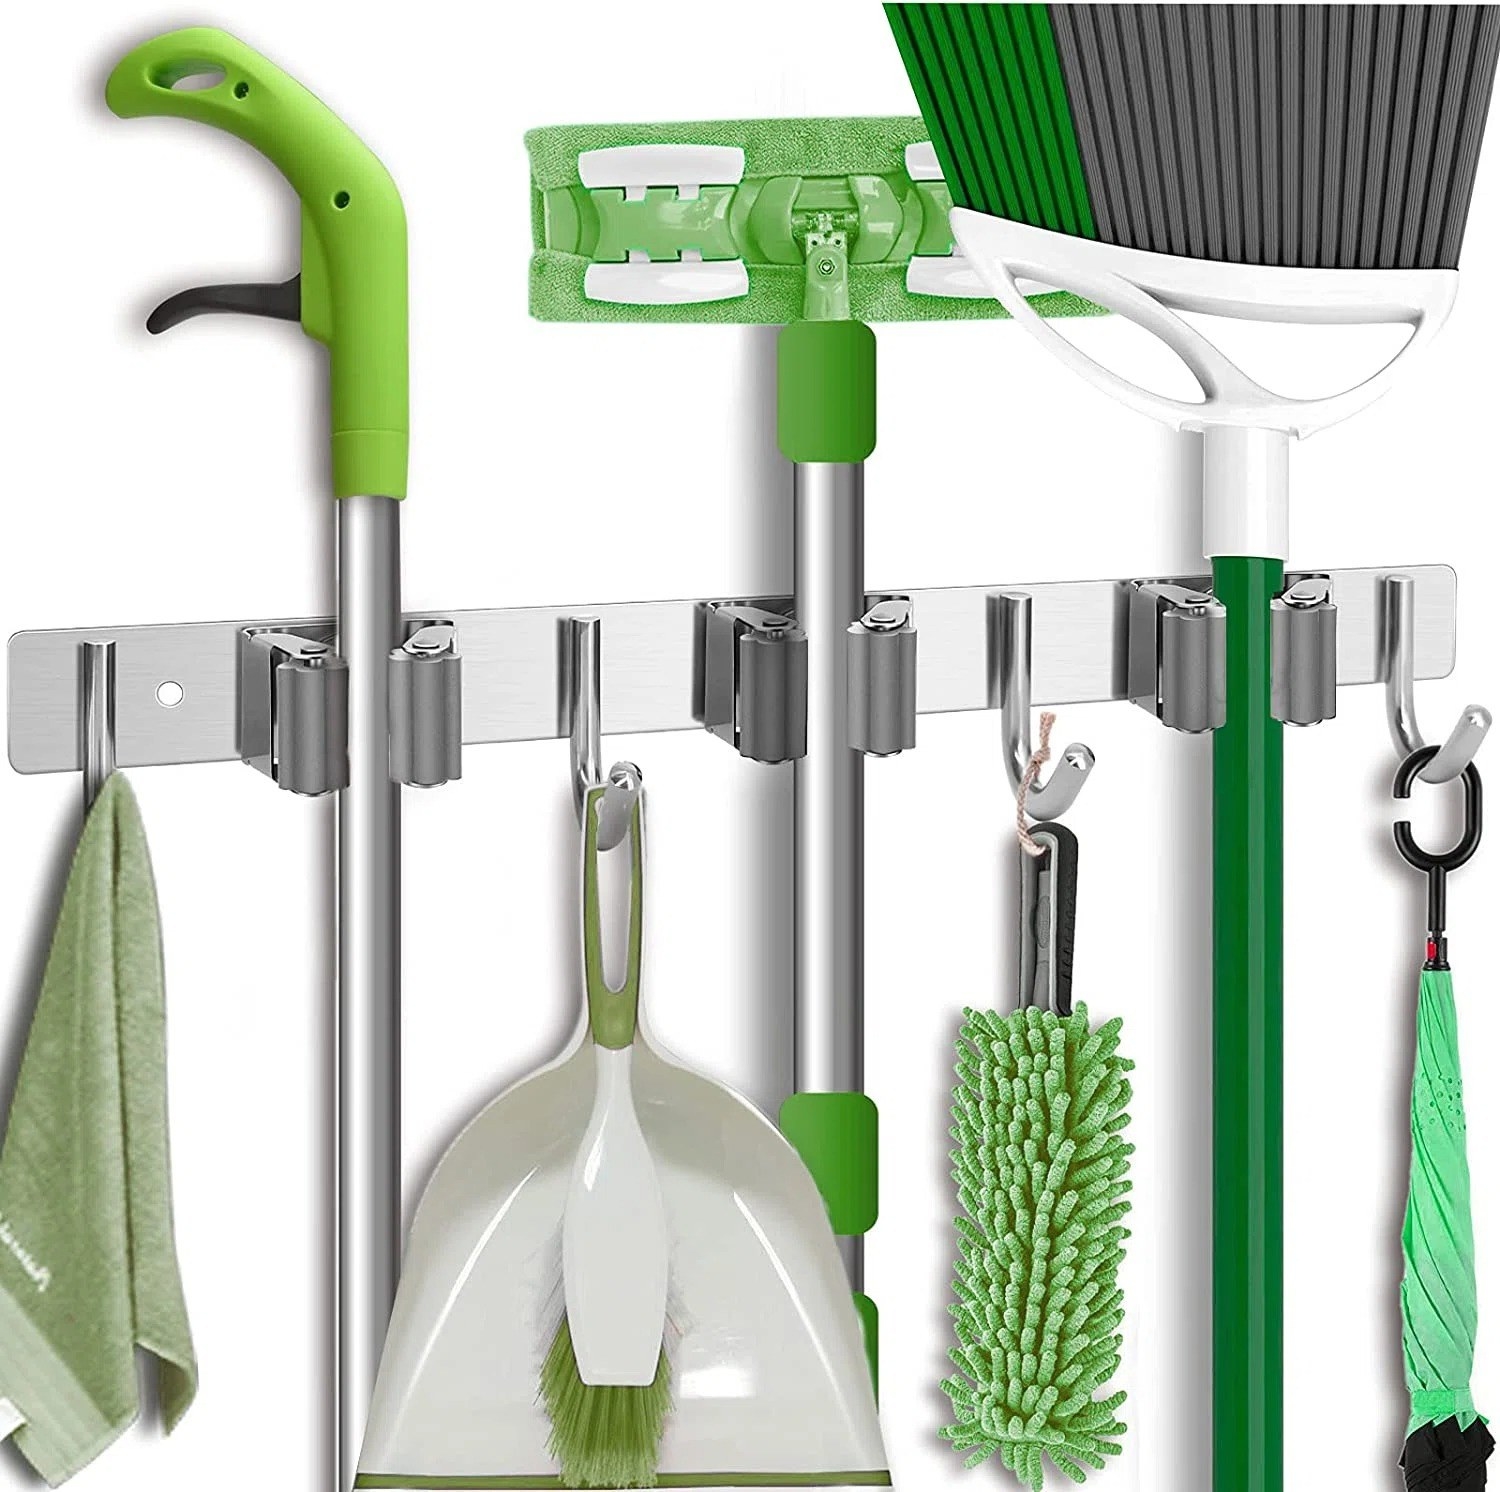 the stainless steel holder carrying brushes and mops